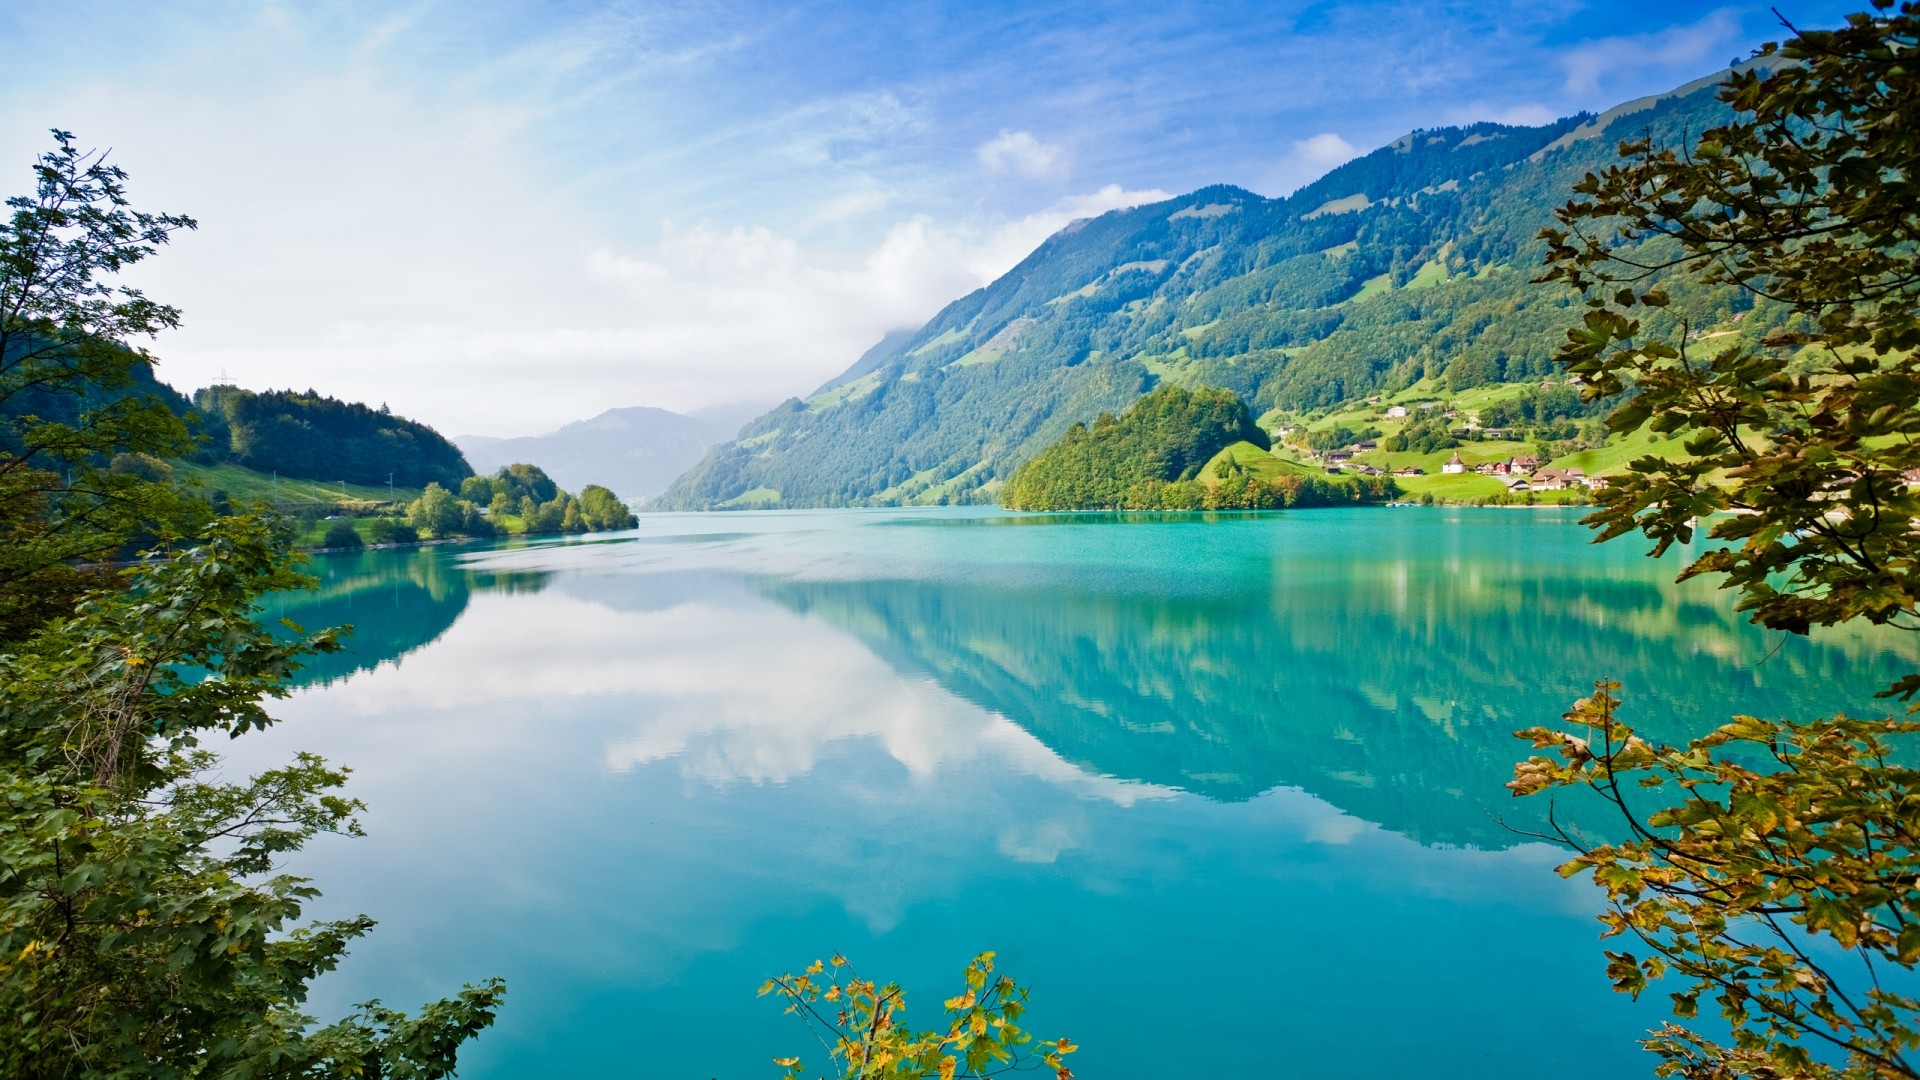 General 1920x1080 water mountains lake reflection nature landscape trees turquoise Alps outdoors Switzerland calm